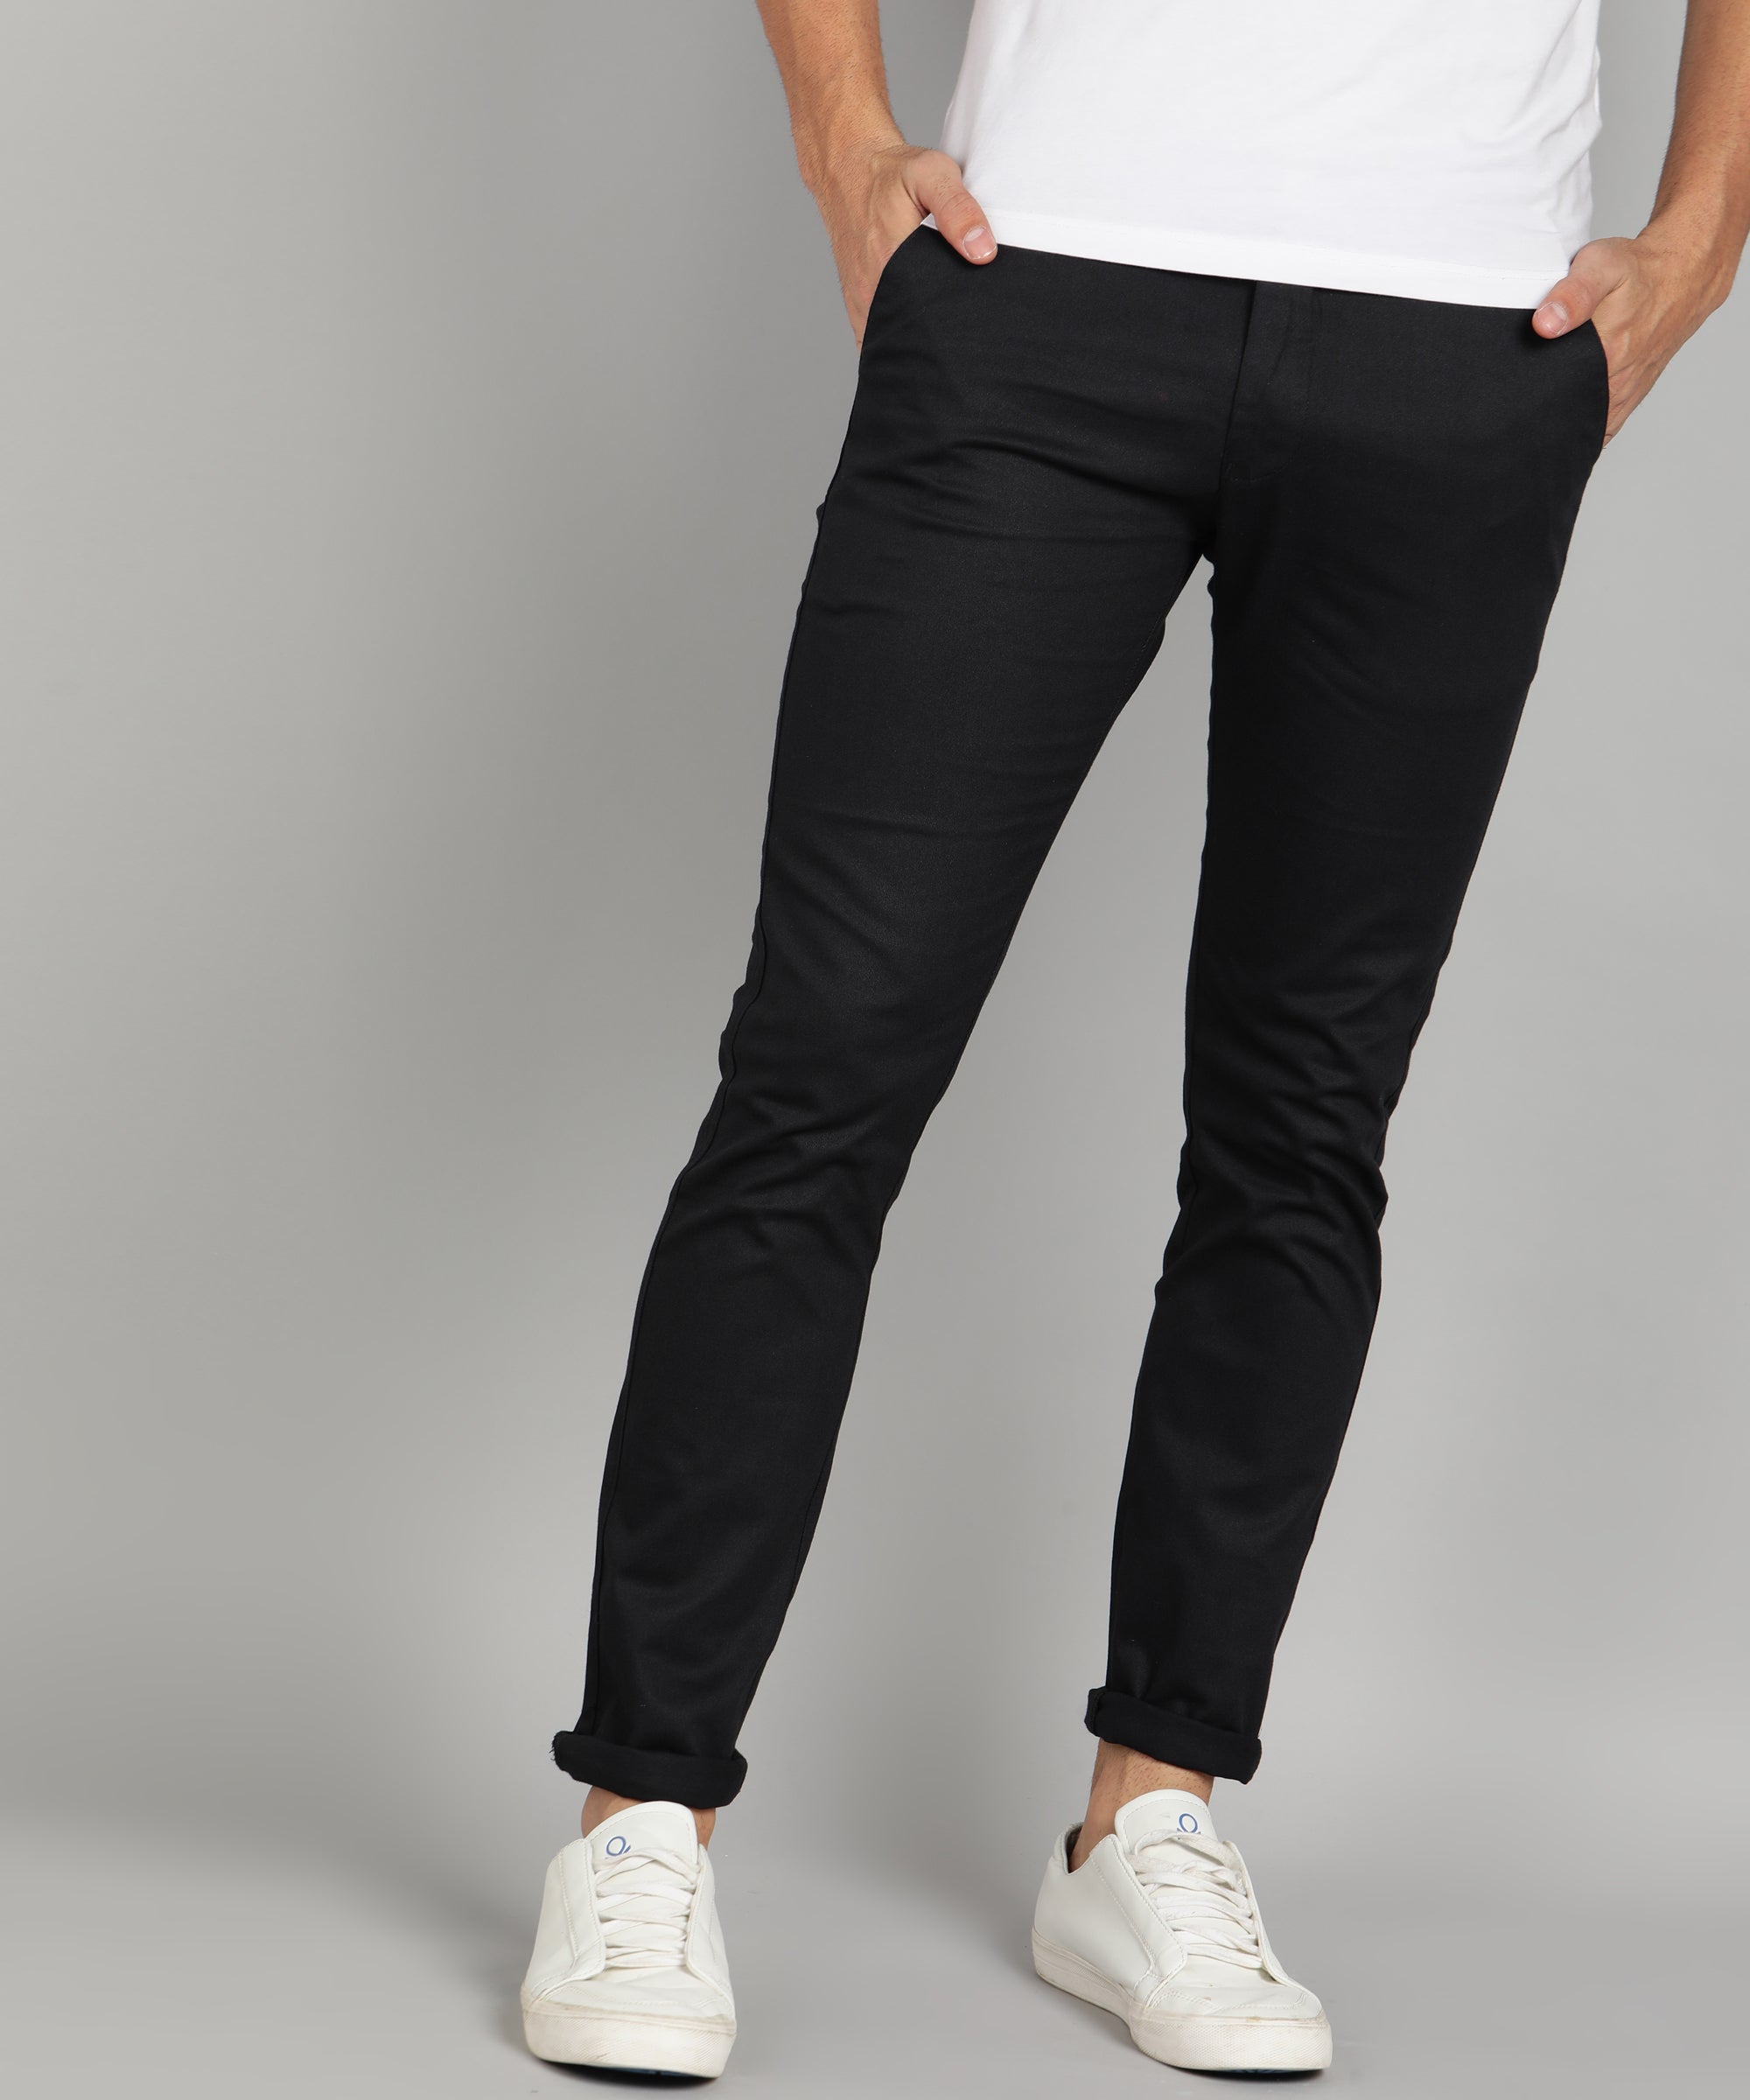 Men's Black Cotton Slim Fit Casual Chinos Trousers Stretch